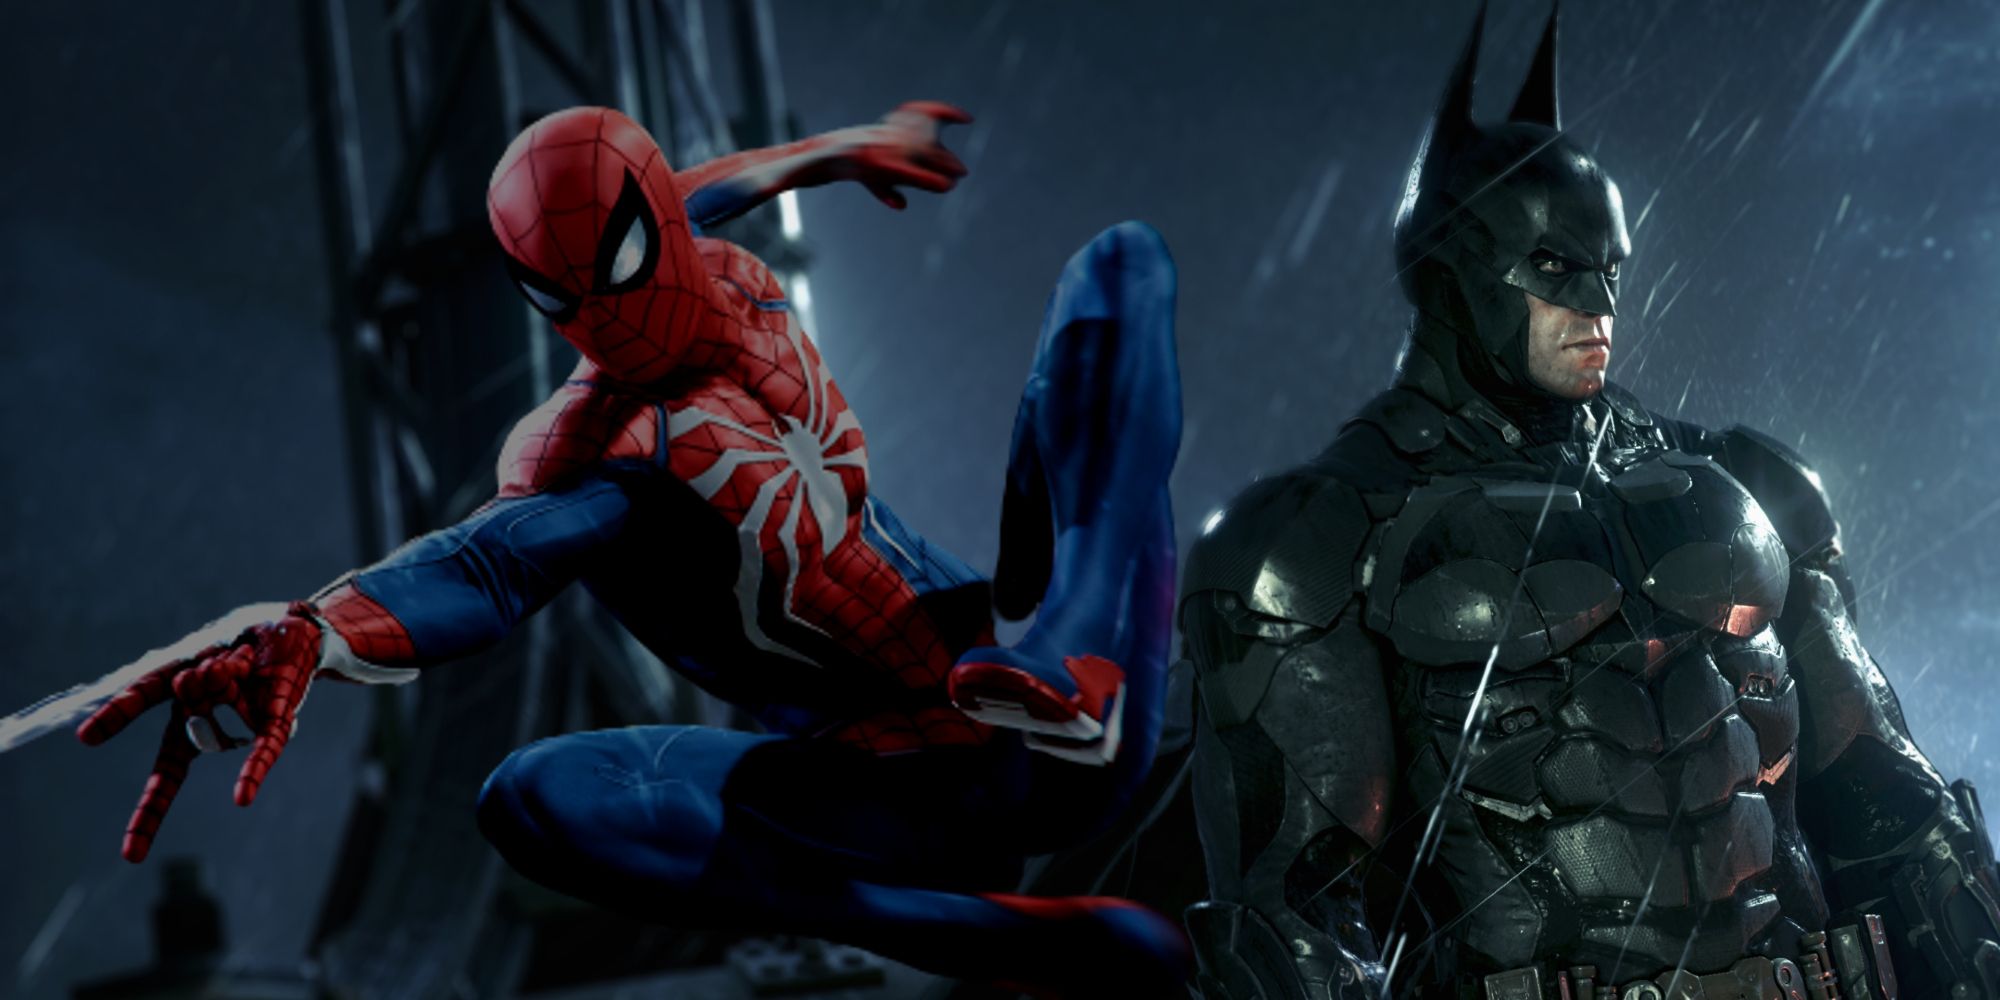 10 Ways Marvel’s Spider-Man Games Look Like The Arkham Games